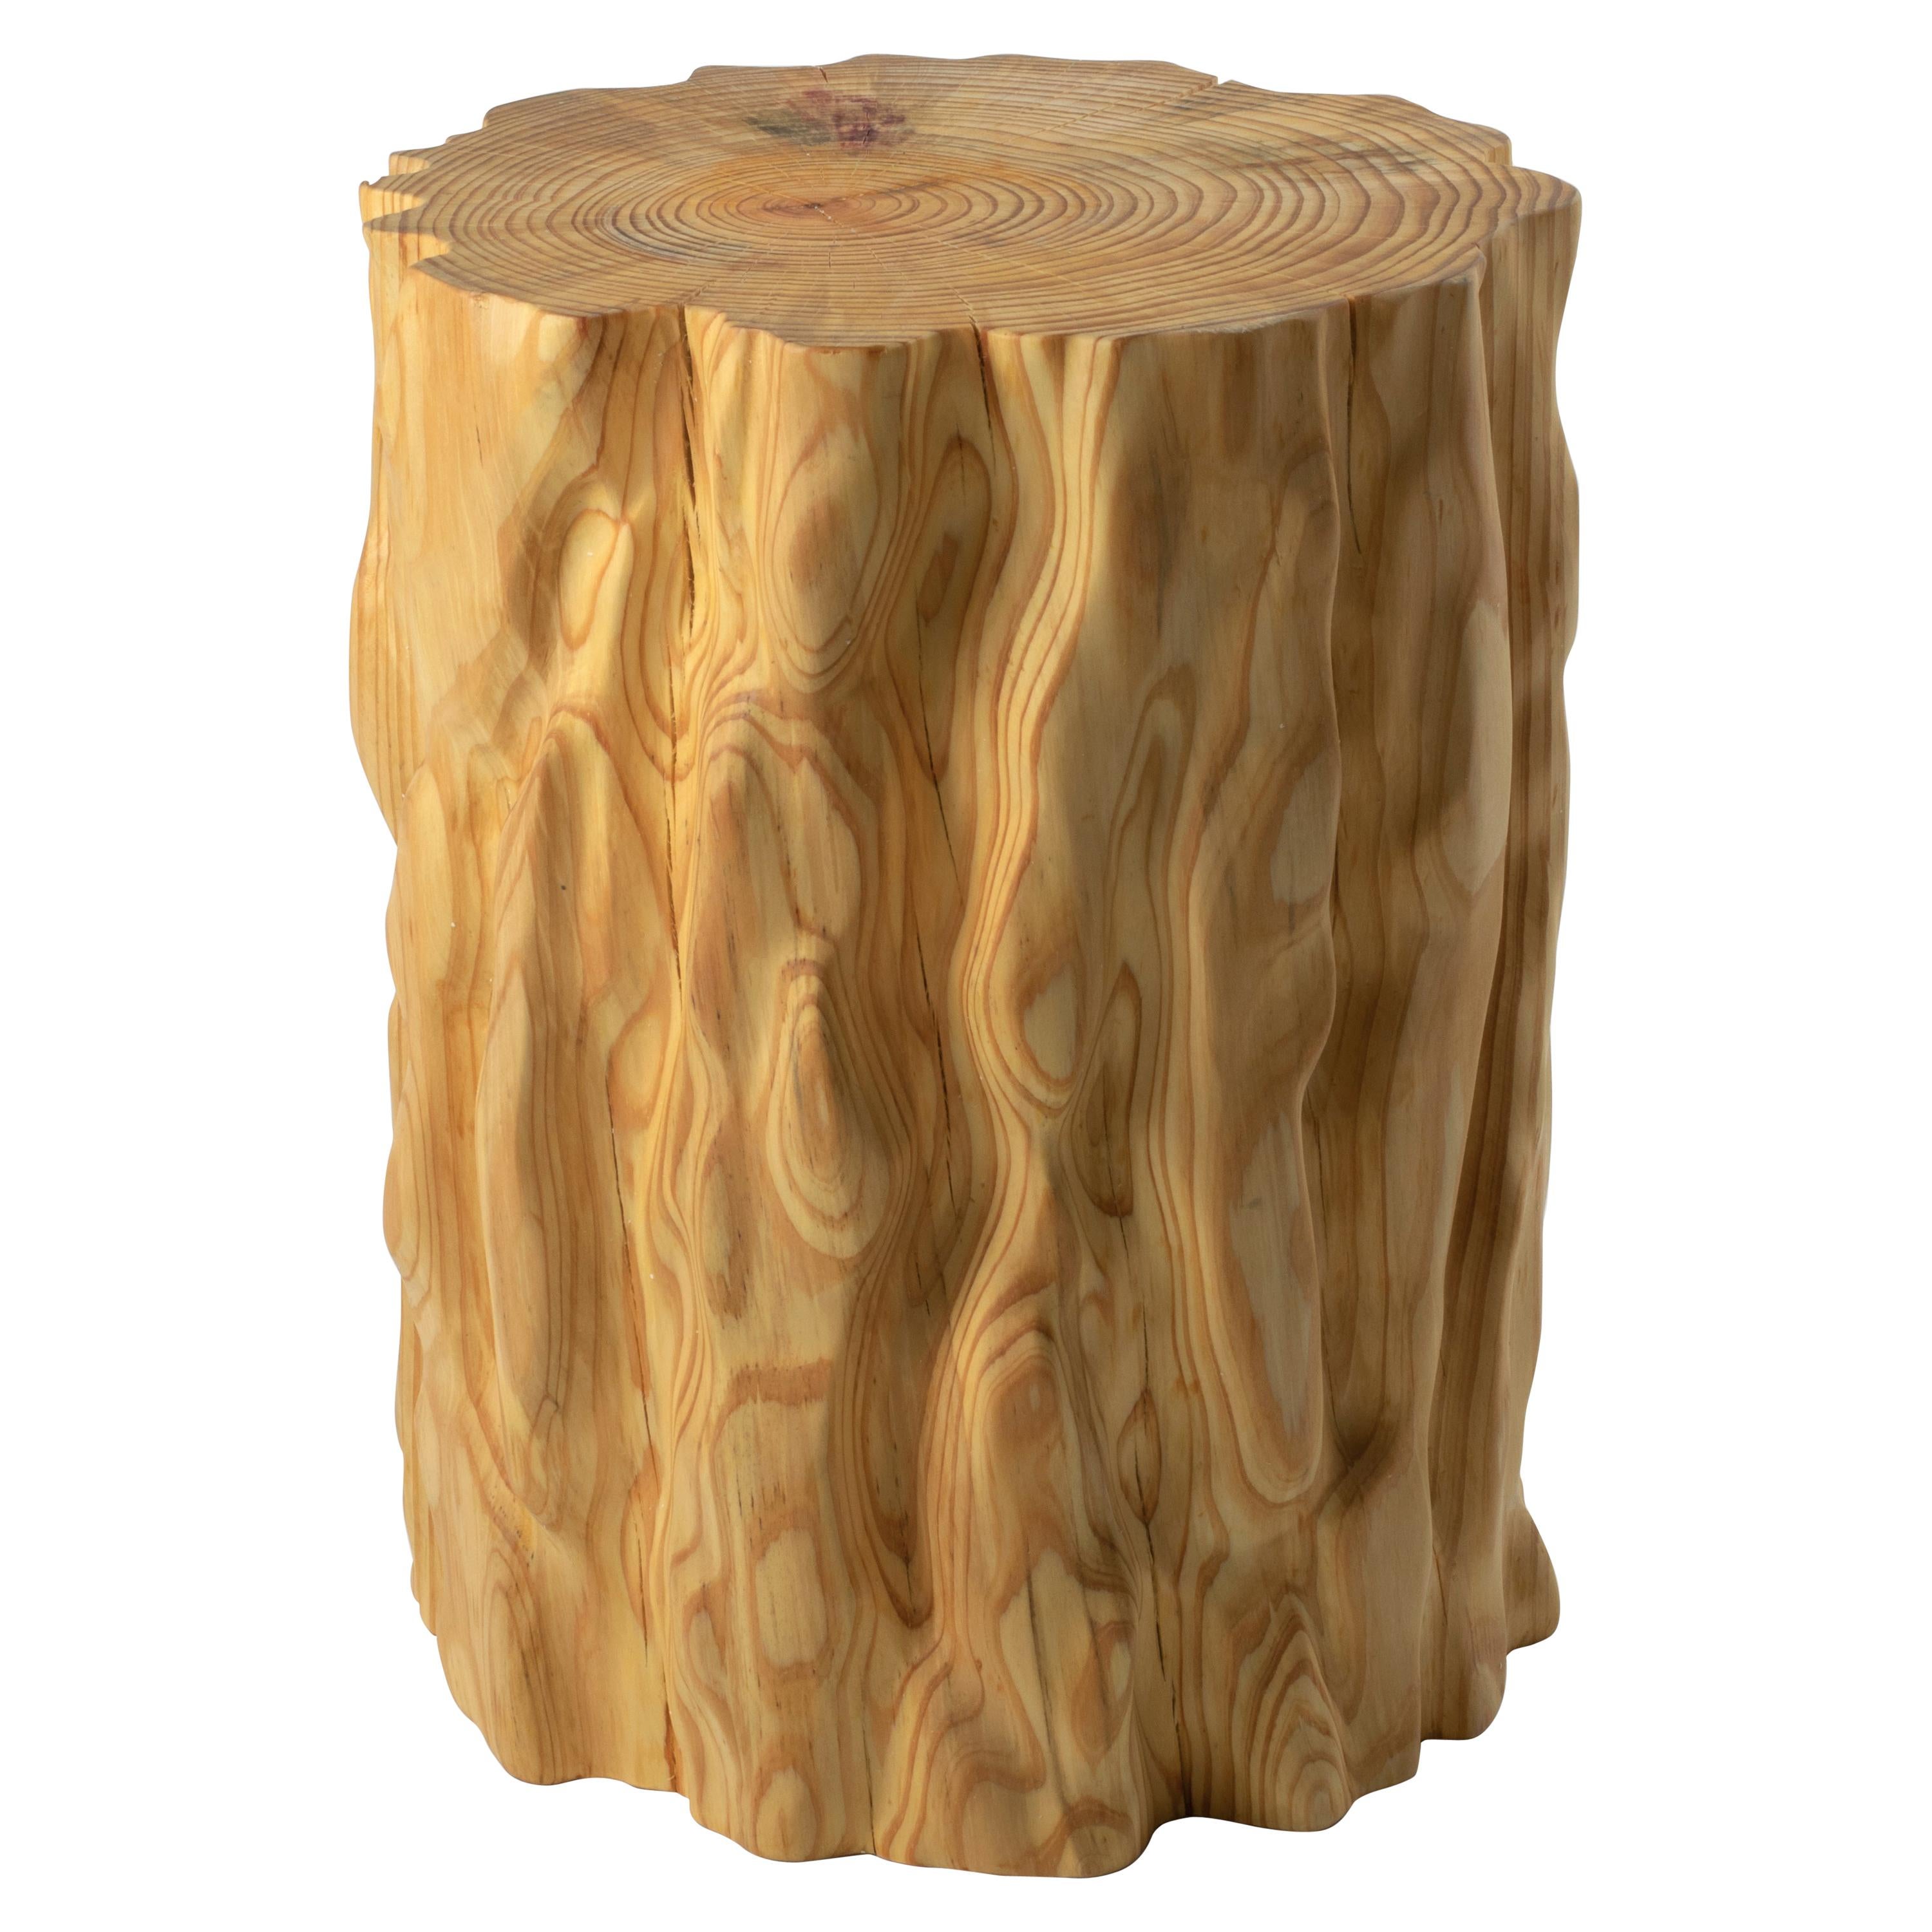 Bark Scale Stool #I by Timbur, Represented by Tuleste Factory